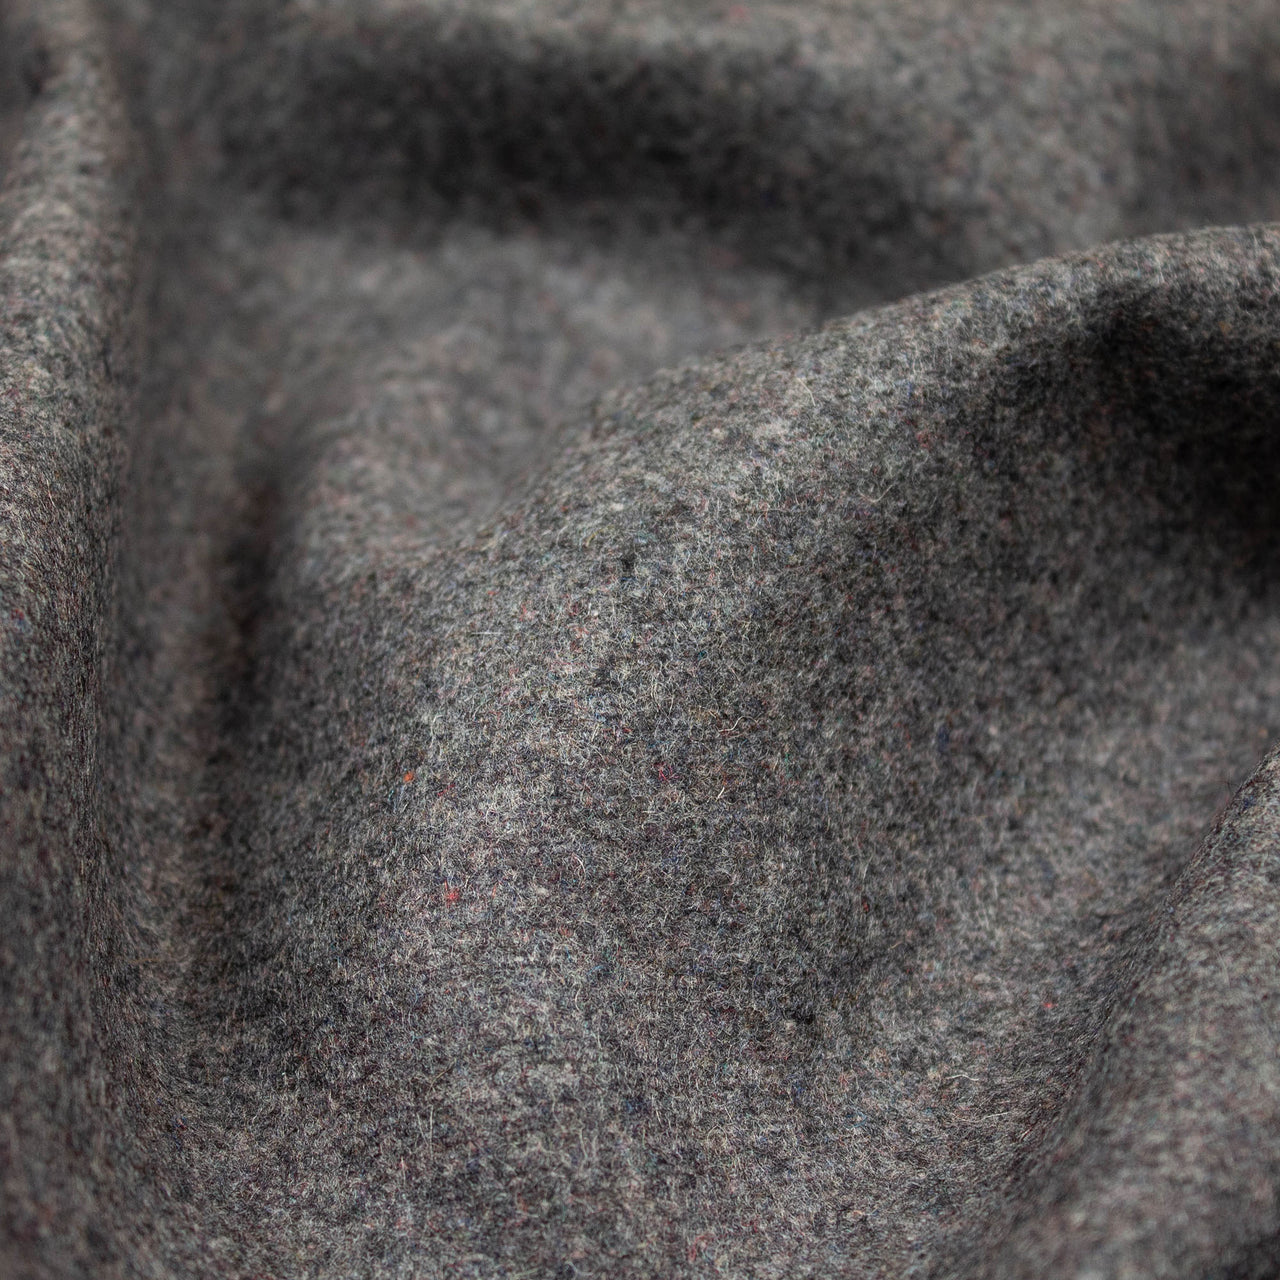 Grey - Melton Wool Fabric -  Soft and Warm Fabric for Coats, Clothing and Blankets